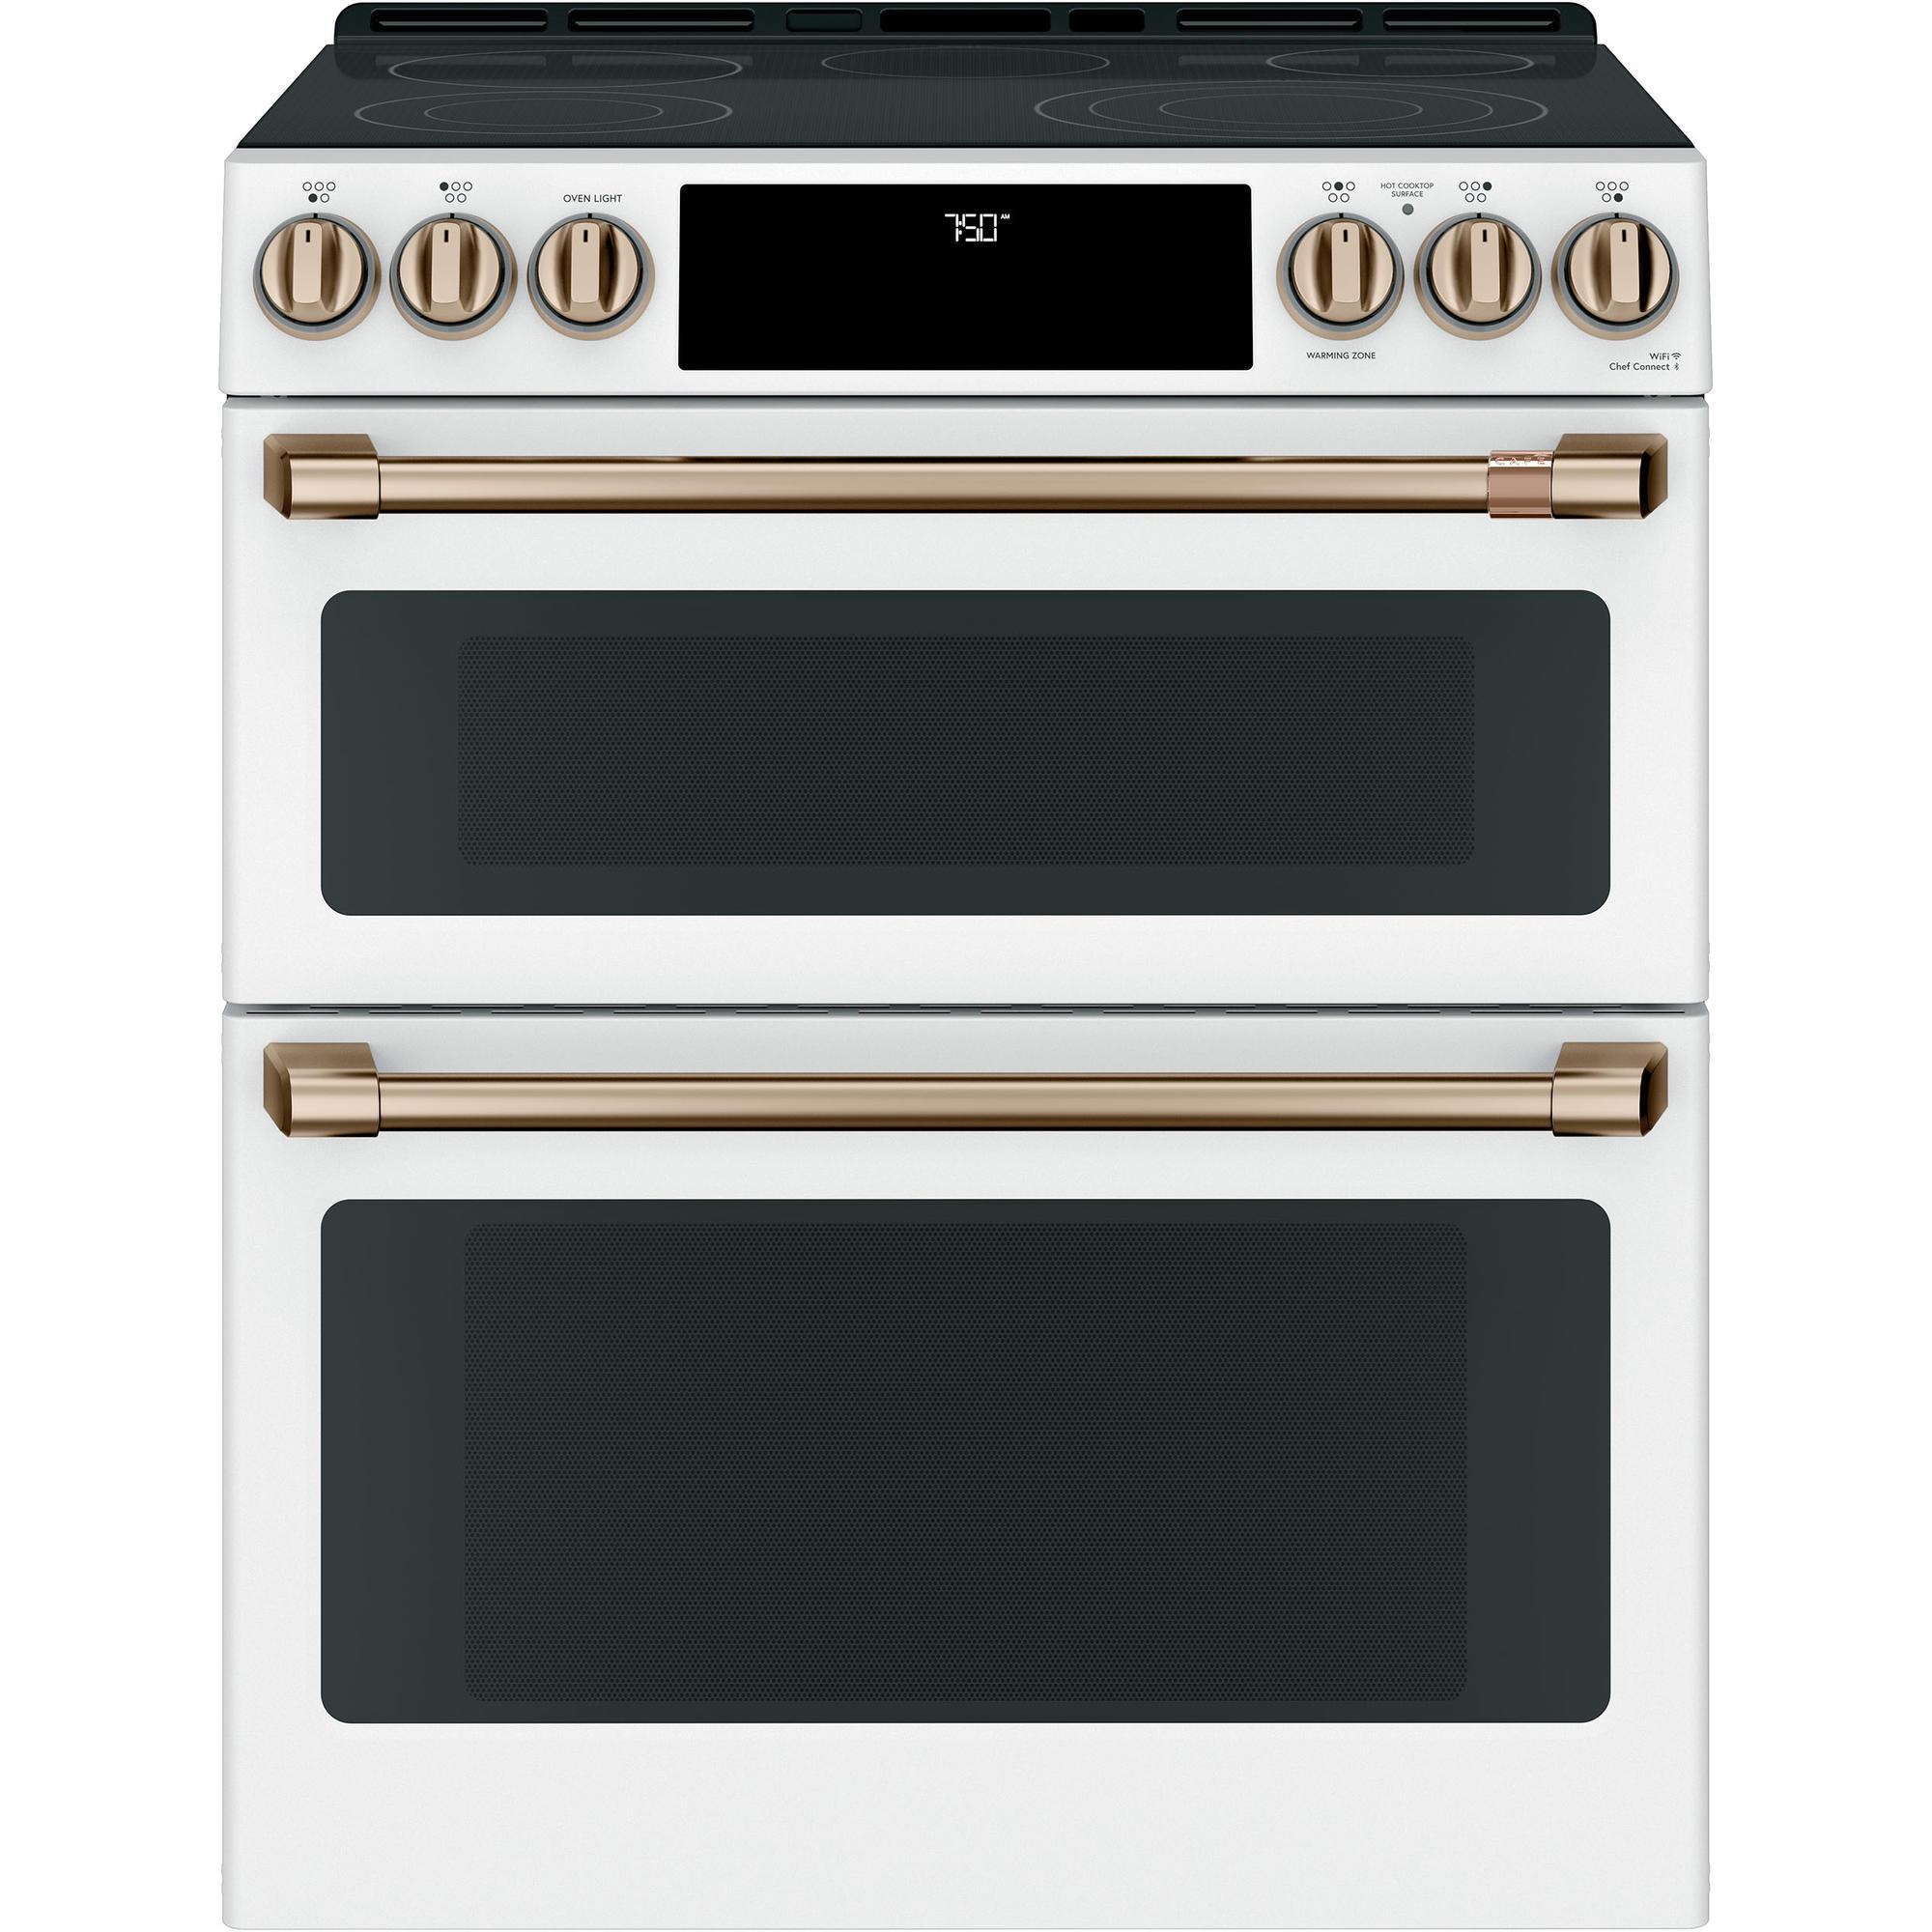 Cafe Café CES750P4MW2 30" Slide-In Radiant and Convection Double Oven Range - Matte White